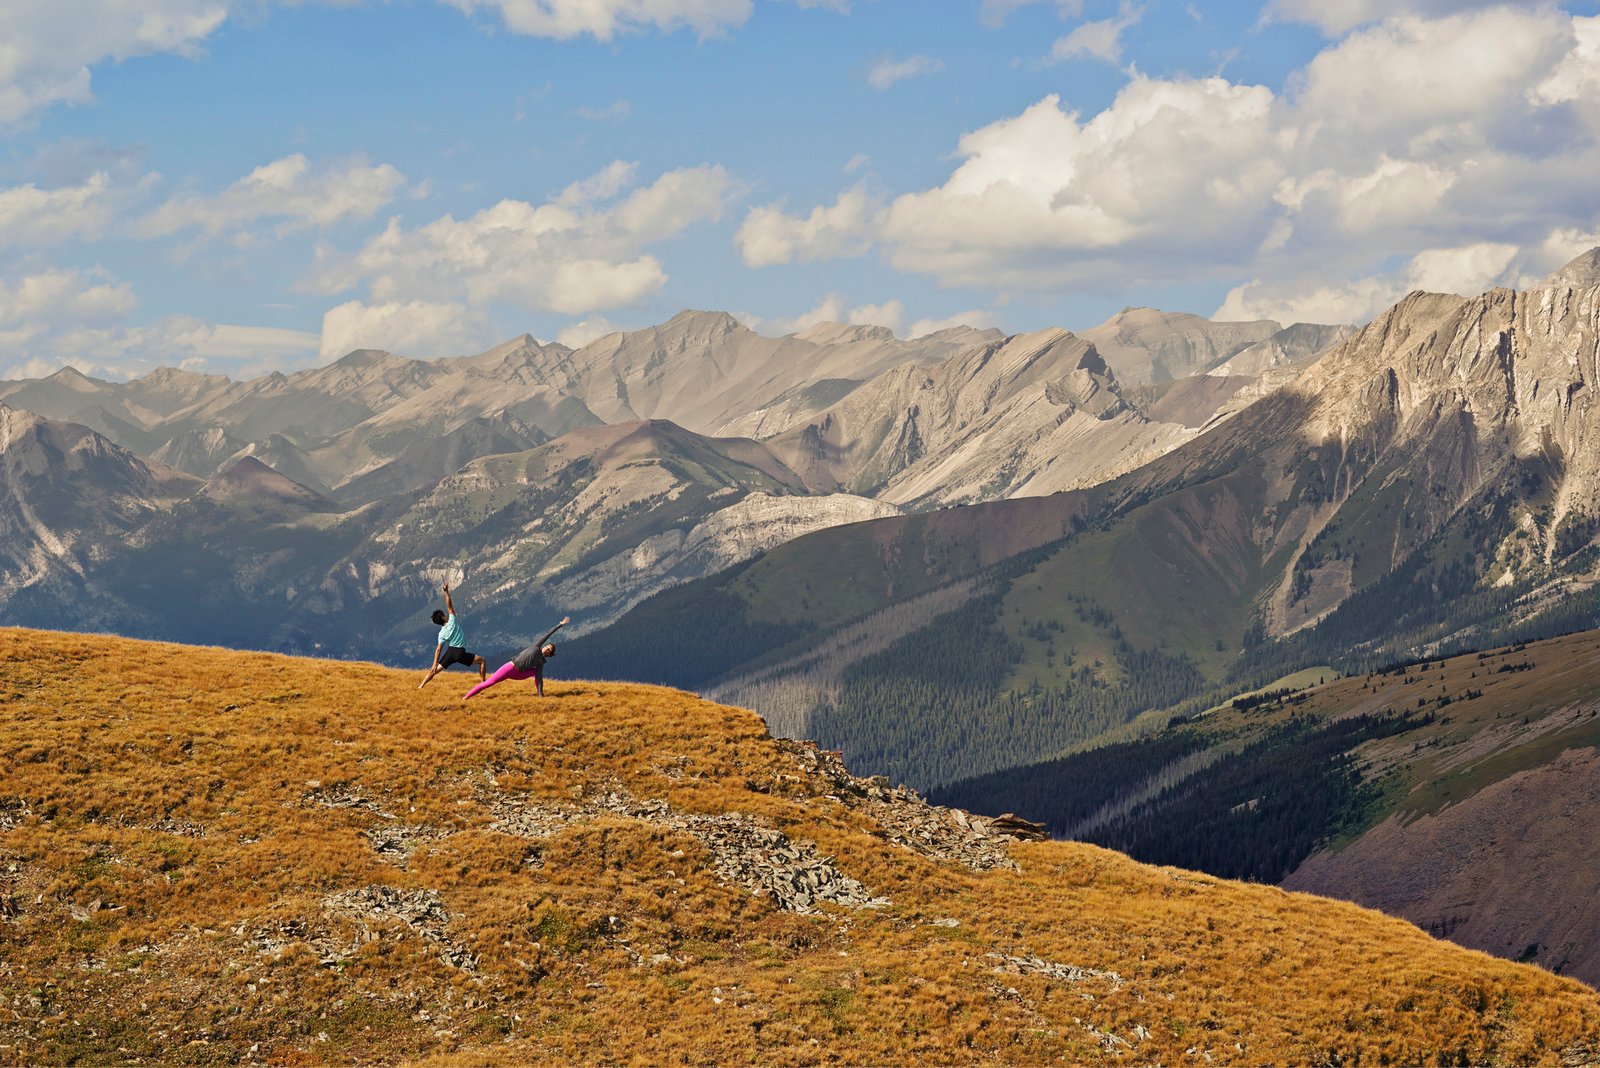 Male and Female doing yoga in front of mountains